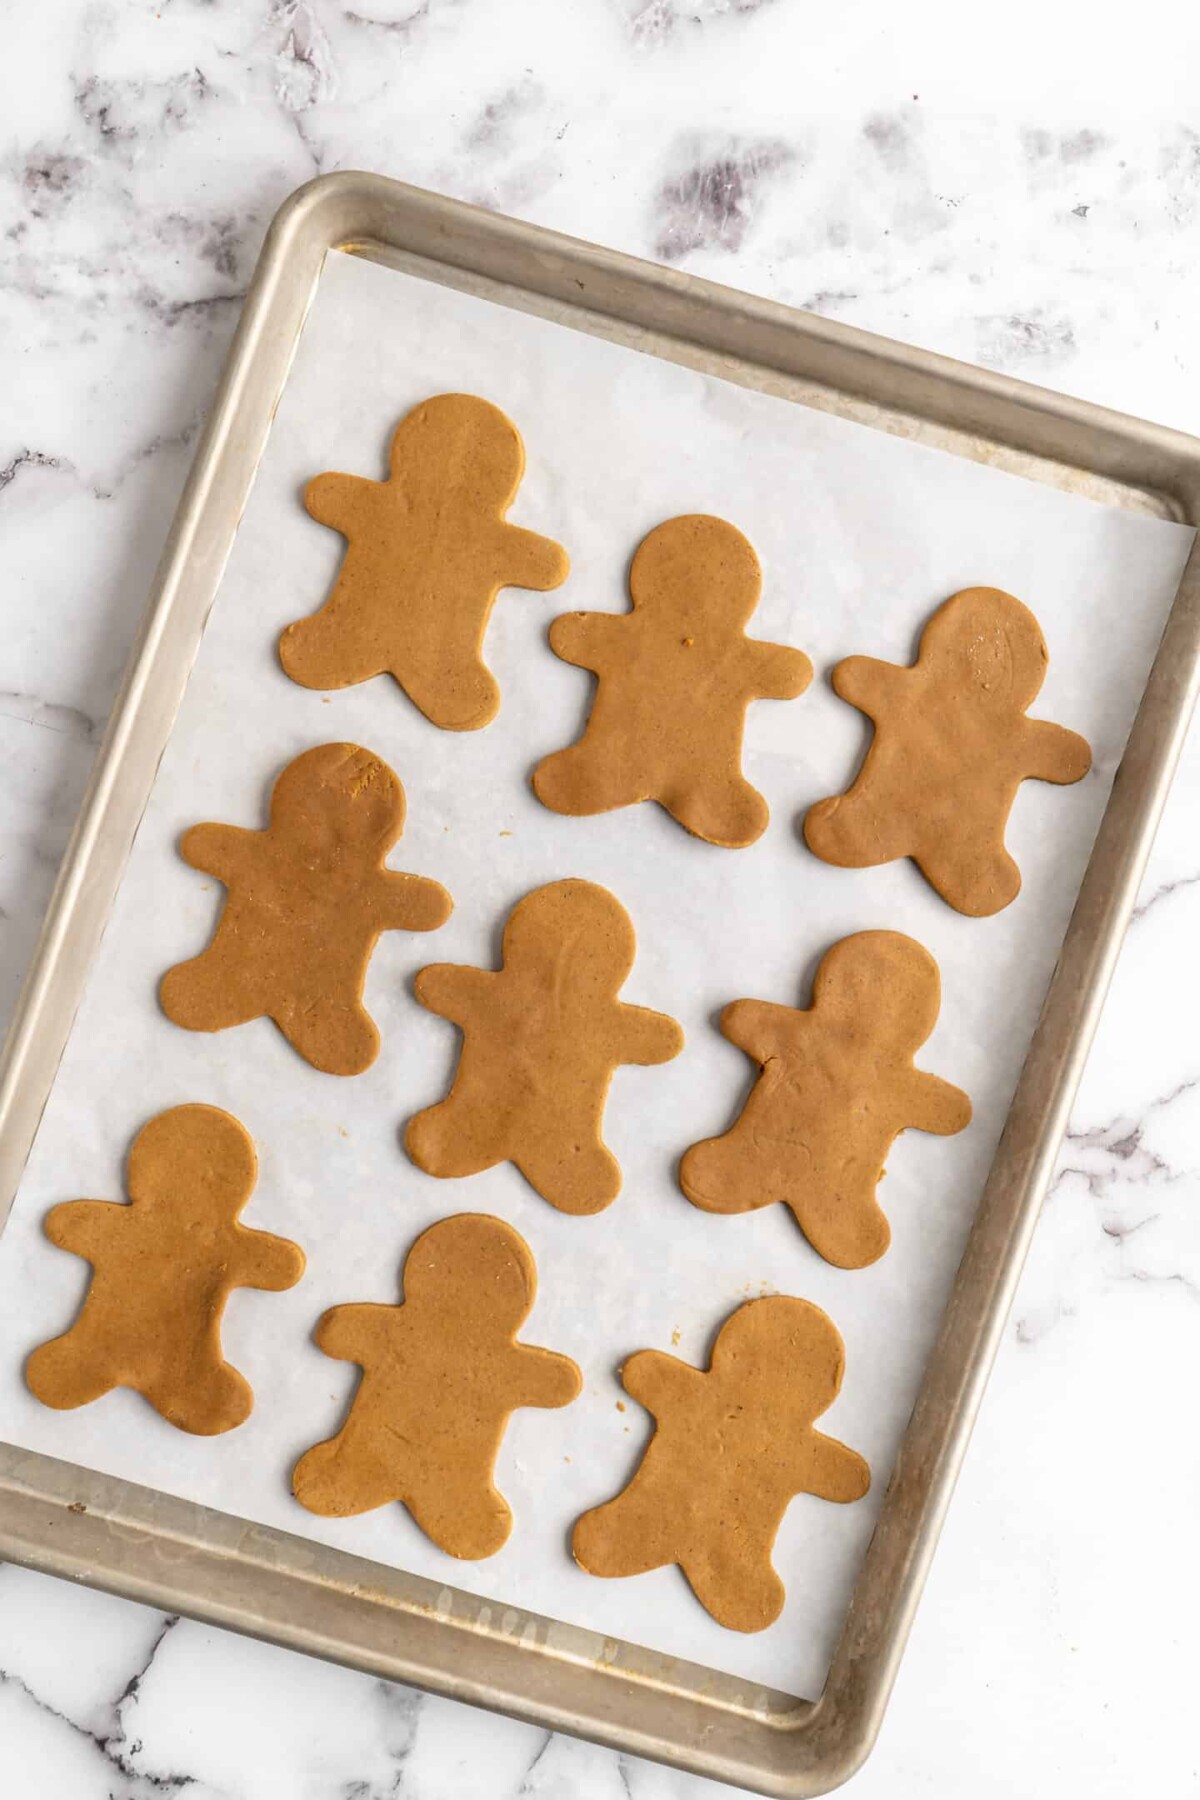 A baking sheet with nine unbaked gingerbread men on it